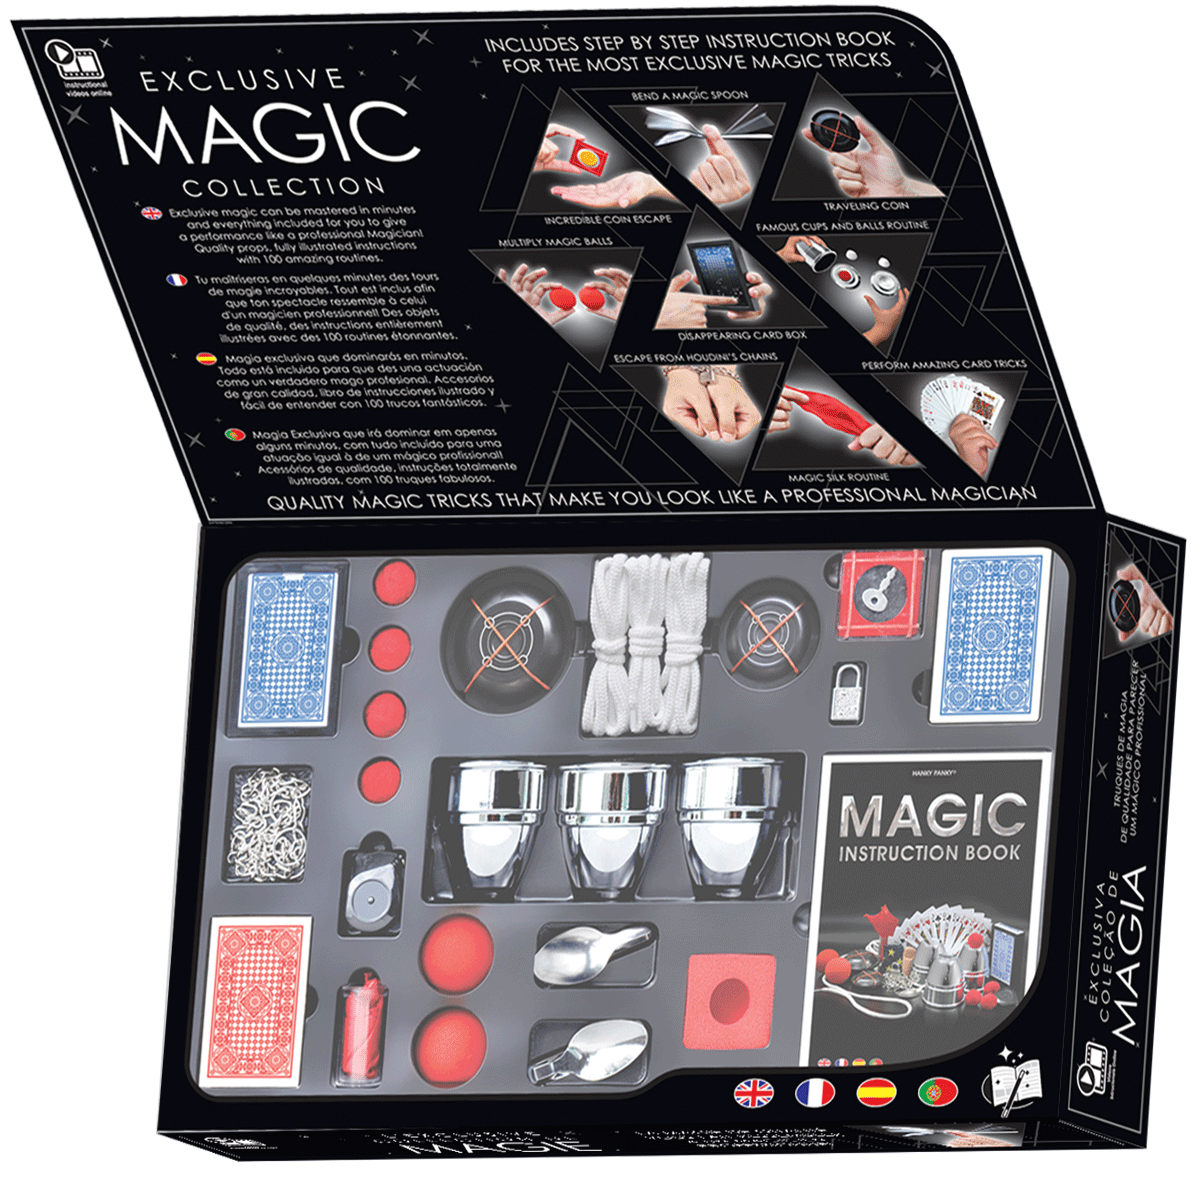 Exclusive Magic Collection over 100 Amazing Magic Tricks included t